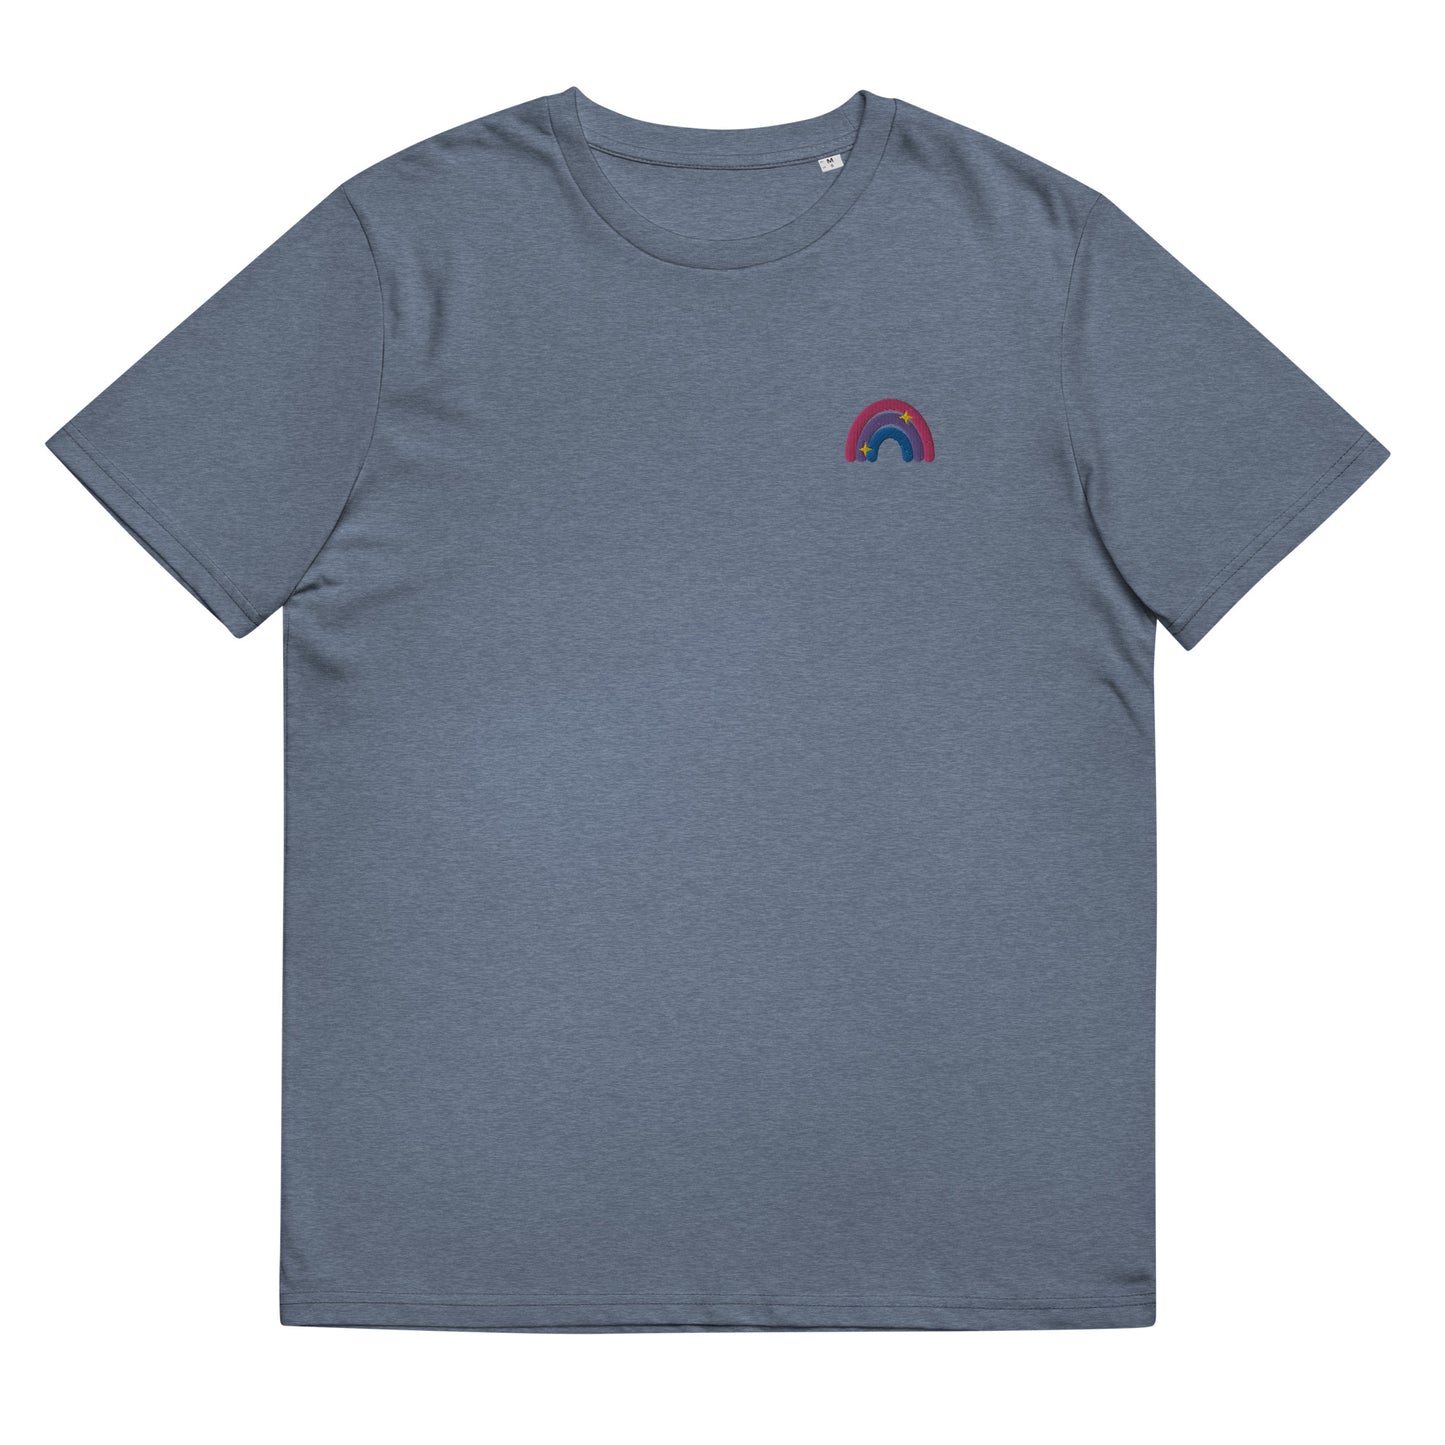 Organic Cotton T-shirt: Bisexual Rainbow Embroidery